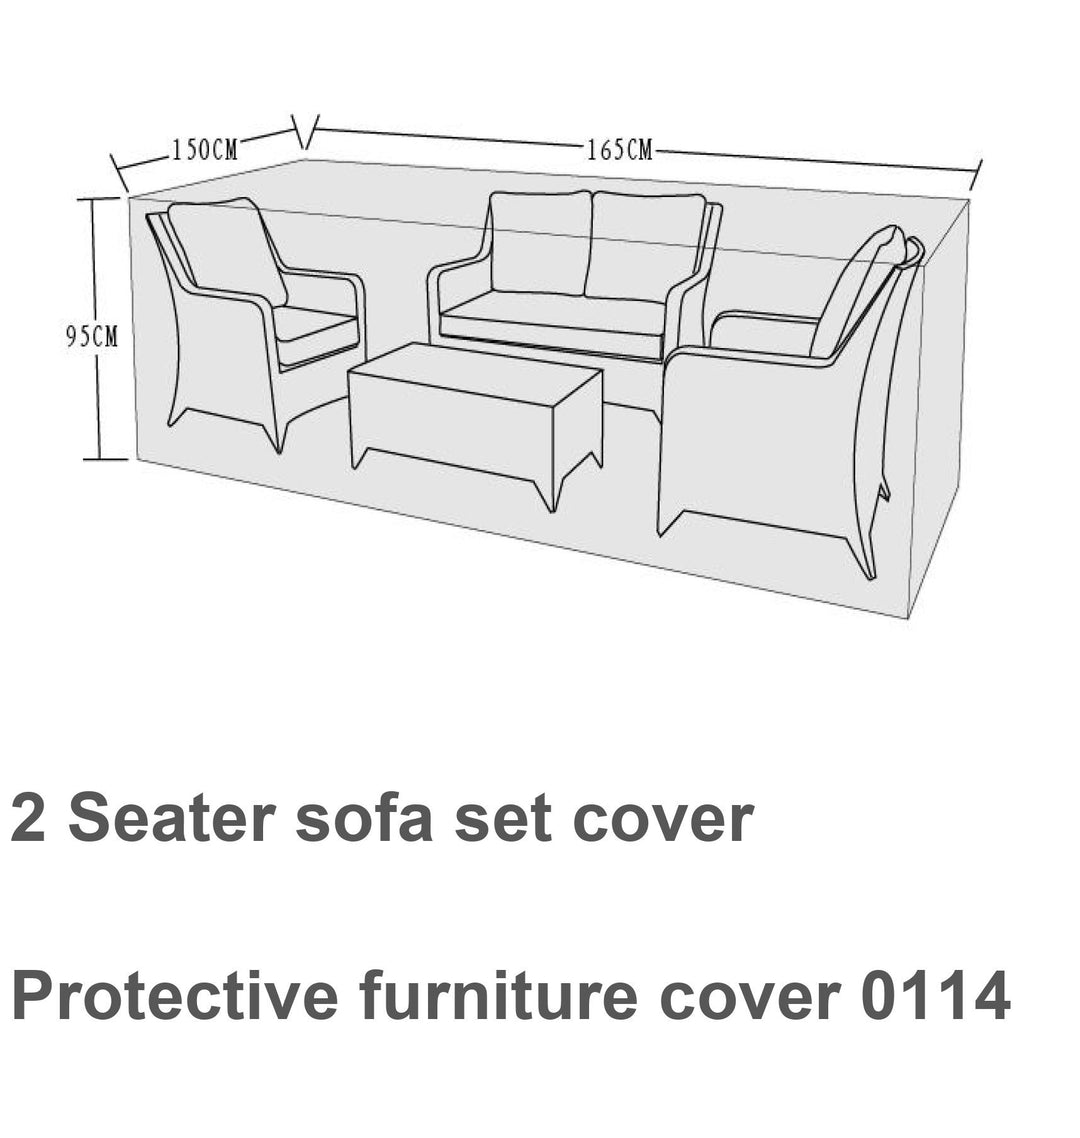 Cover to fit 2 seater sofa sets - COVE0114 - Modern Rattan